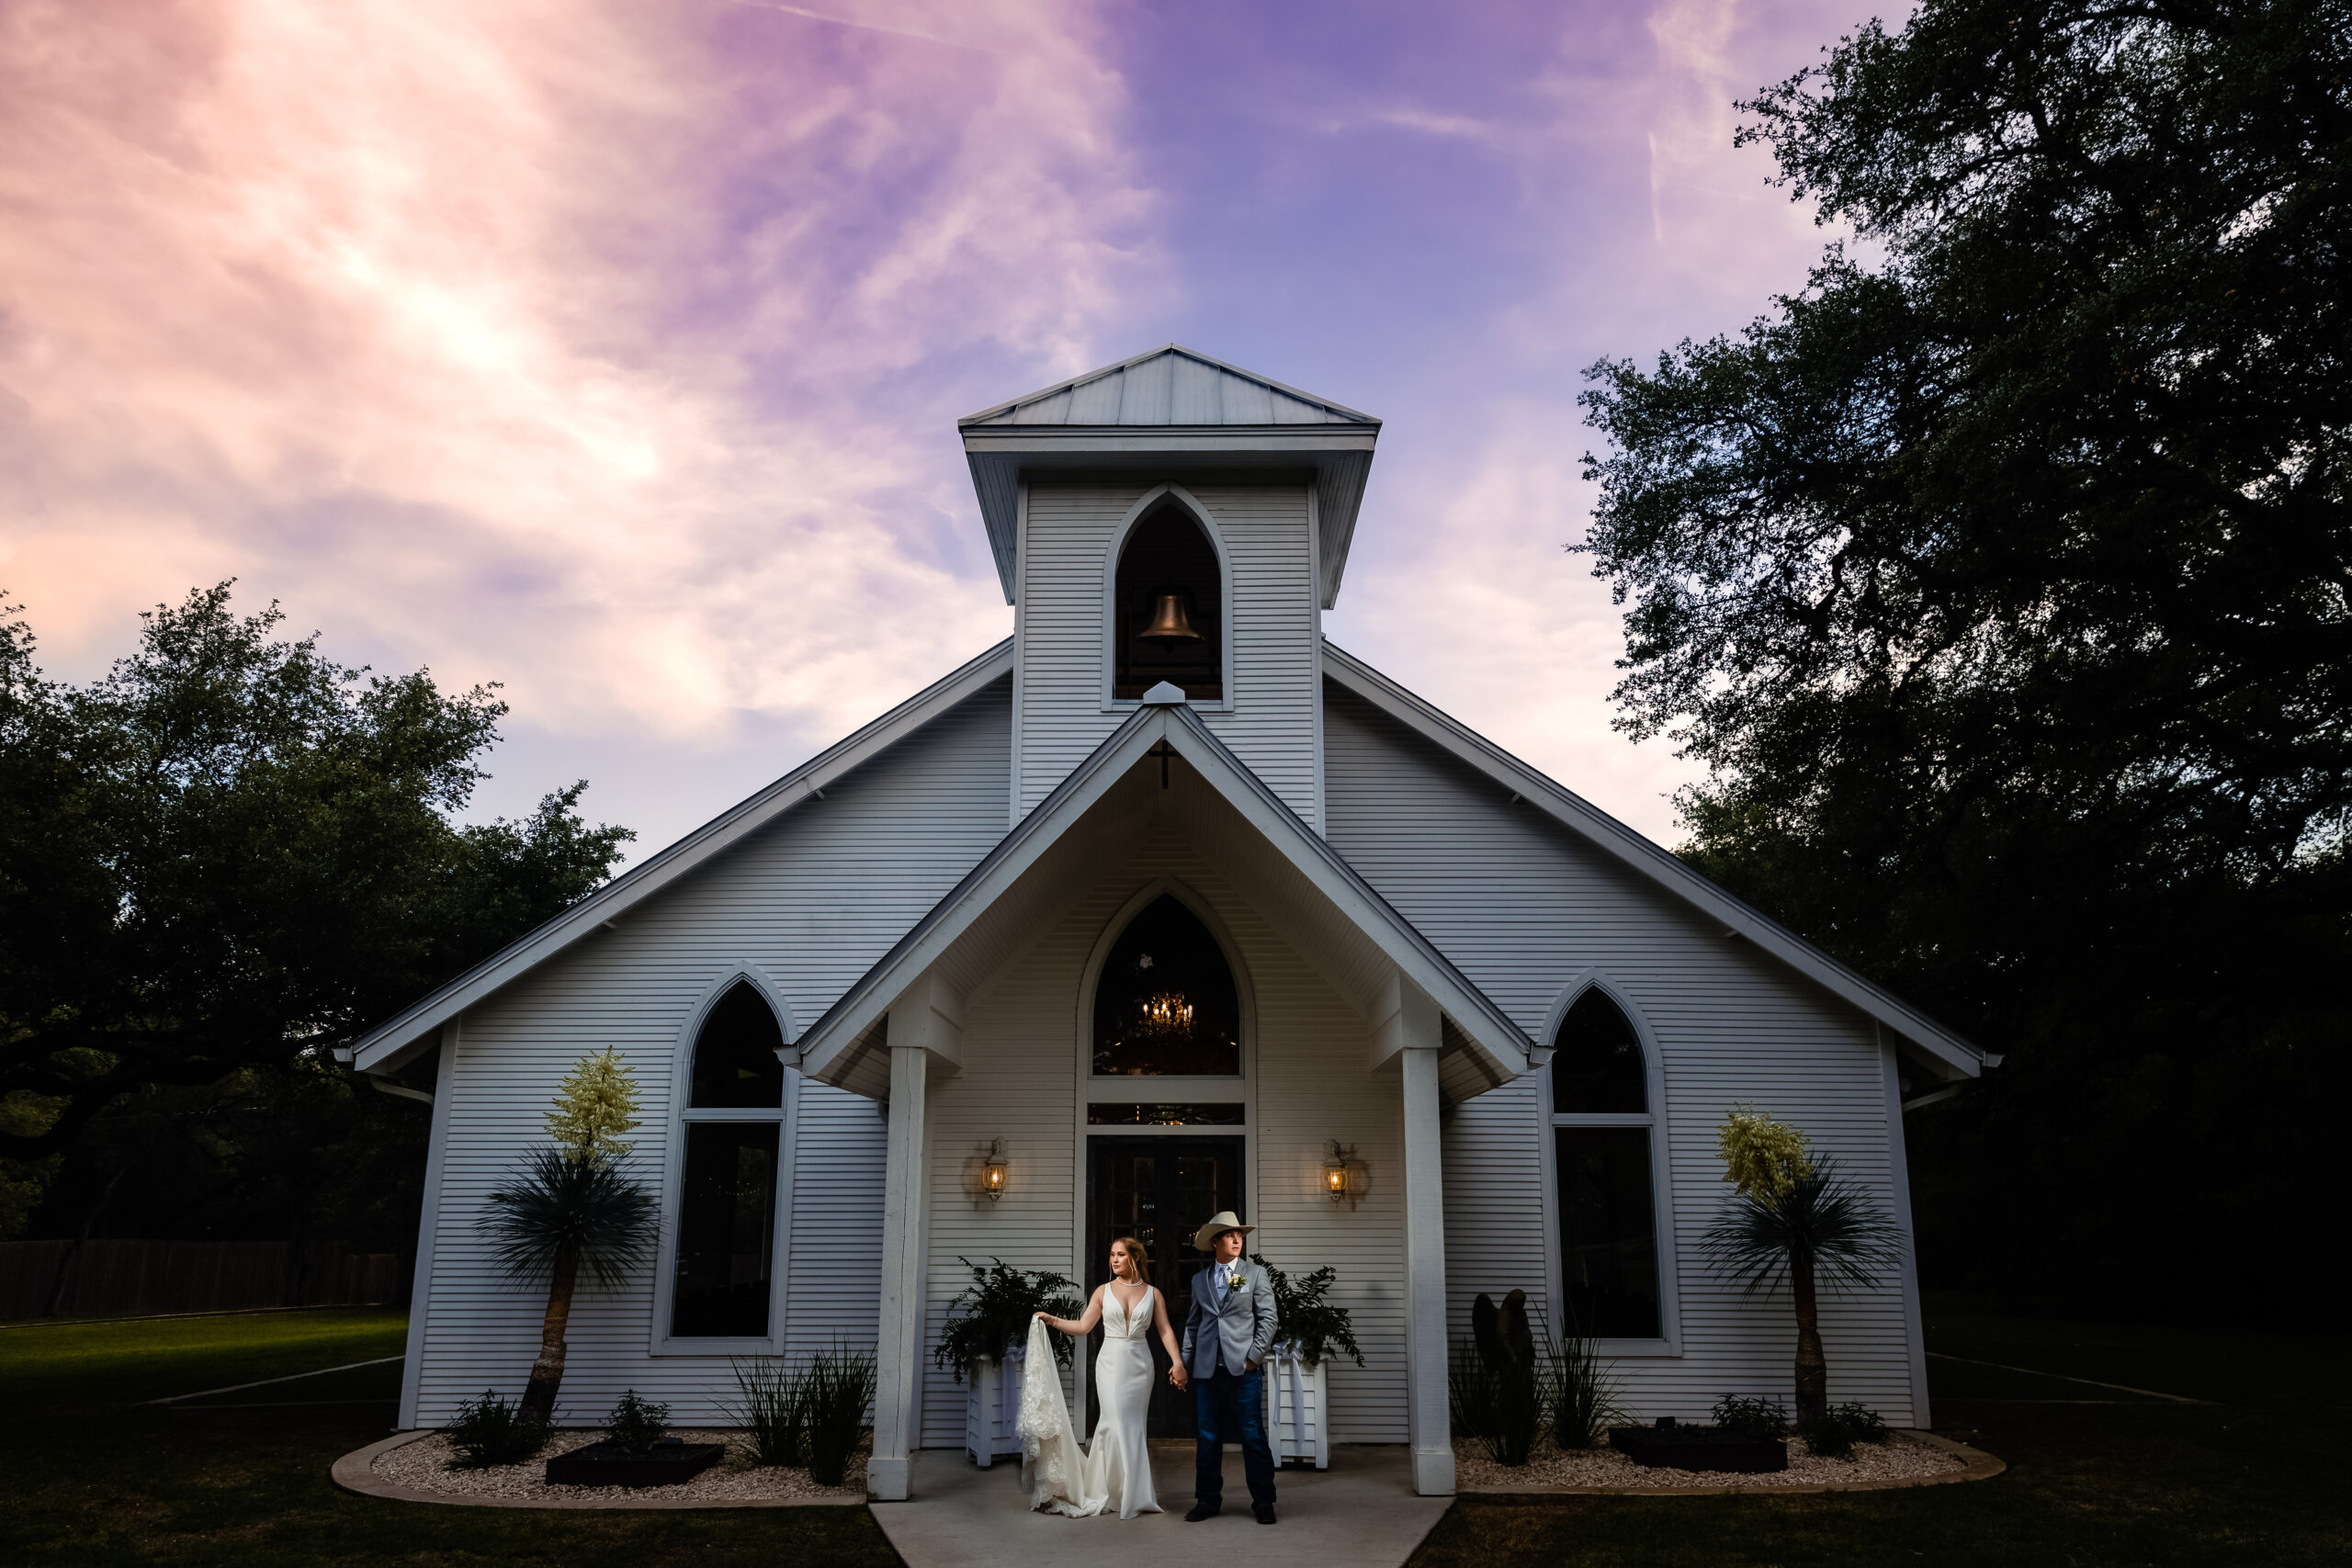 Bride and Groom get married in the little white chapel at The Chandelier of Gruene at sunset.